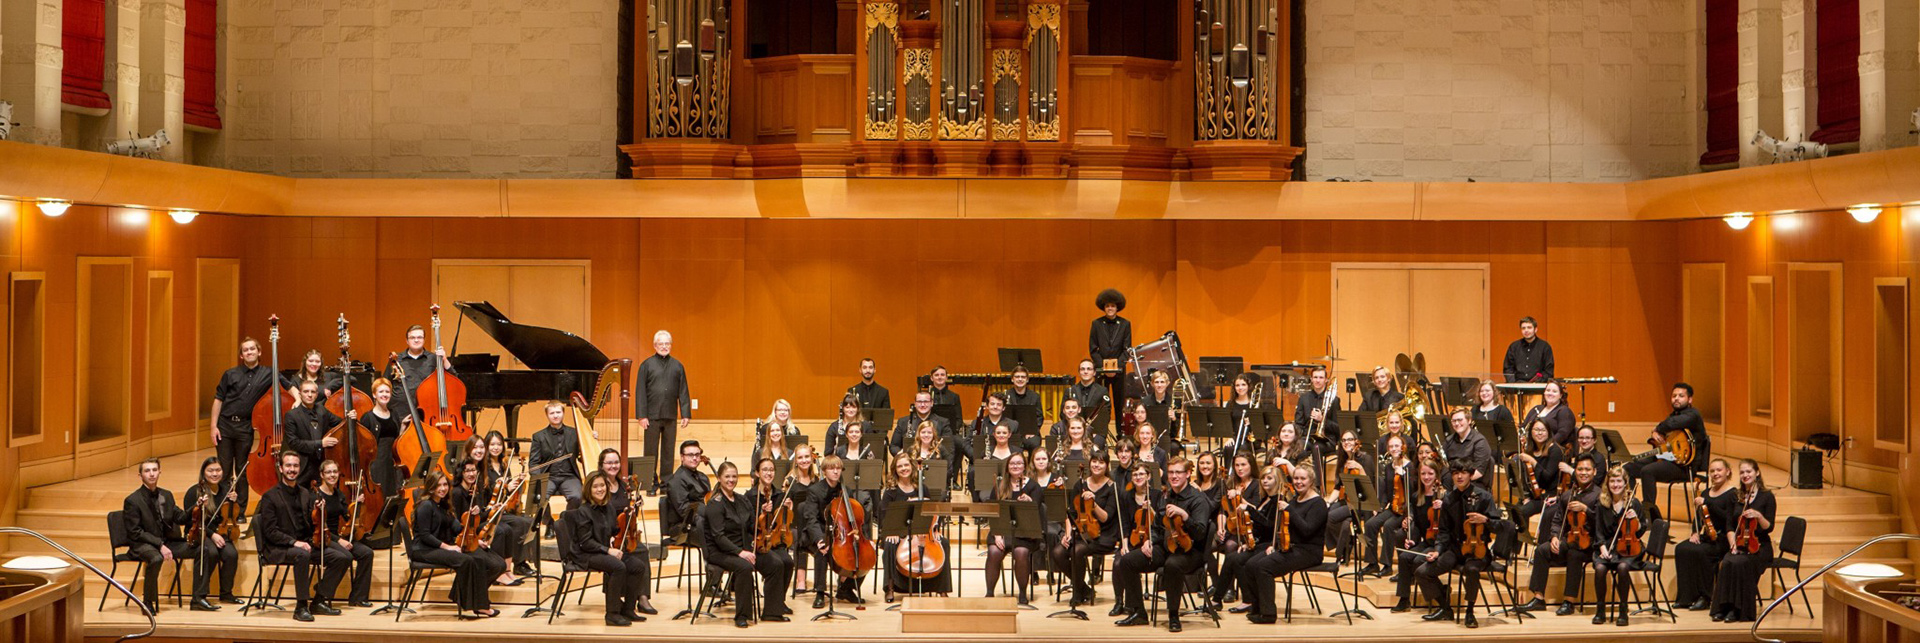 PLU Orchestra in Lagerquist Concert Hall